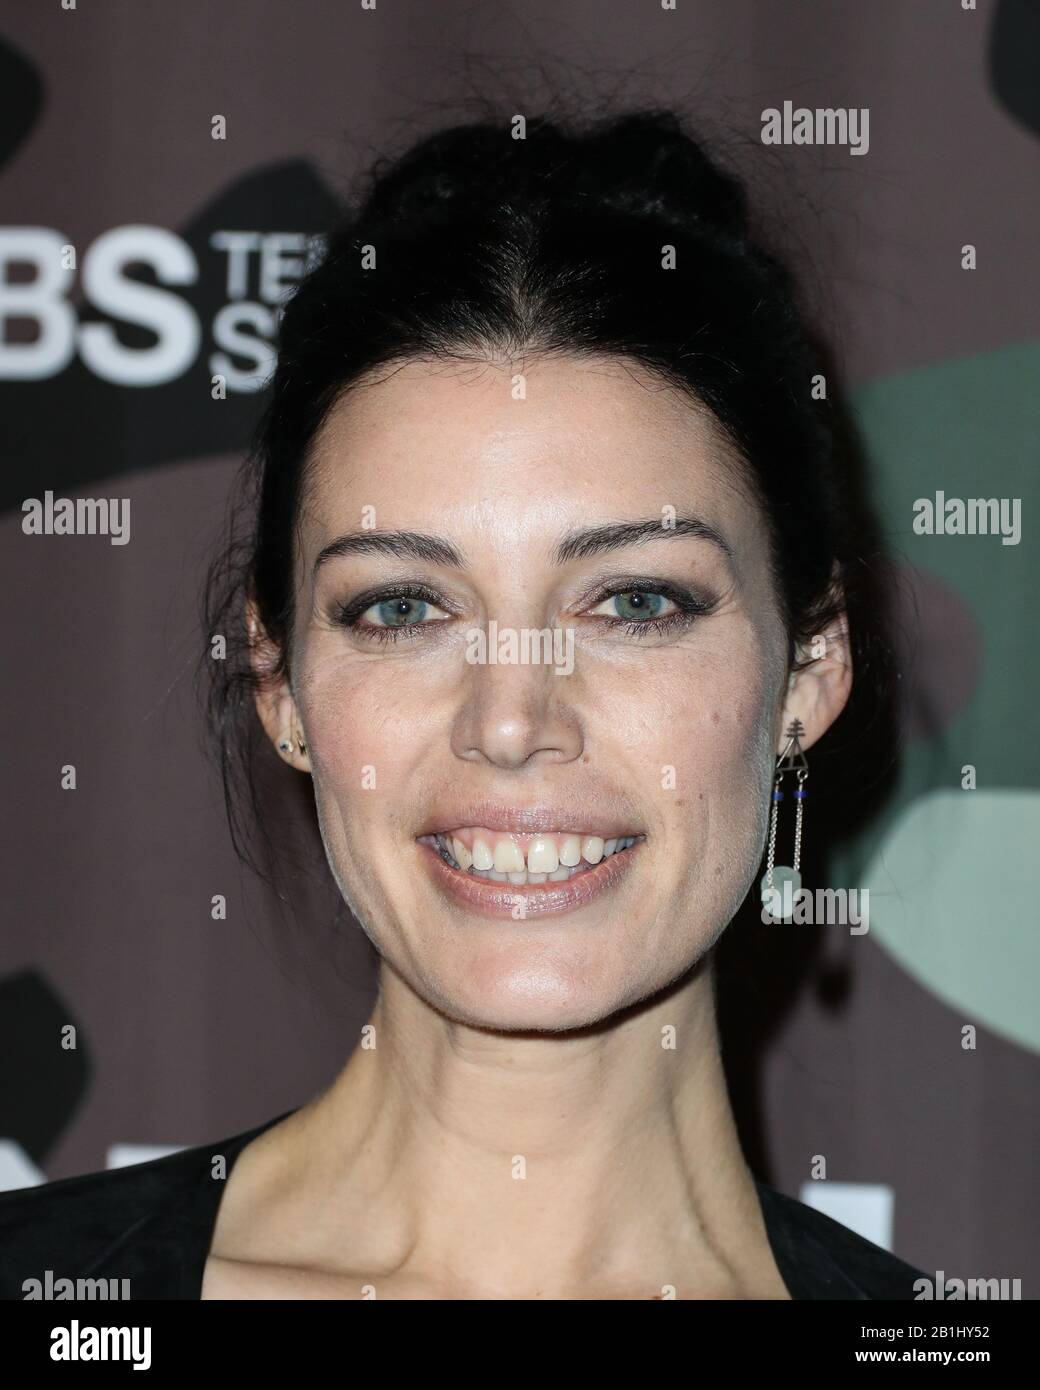 Hollywood, United States. 25th Feb, 2020. HOLLYWOOD, LOS ANGELES, CALIFORNIA, USA - FEBRUARY 25: Actress Jessica Pare arrives at the Los Angeles Premiere Of CBS Television Studios' 'SEAL Team' held at ArcLight Cinemas Hollywood on February 25, 2020 in Hollywood, Los Angeles, California, United States. (Photo by Xavier Collin/Image Press Agency) Credit: Image Press Agency/Alamy Live News Stock Photo